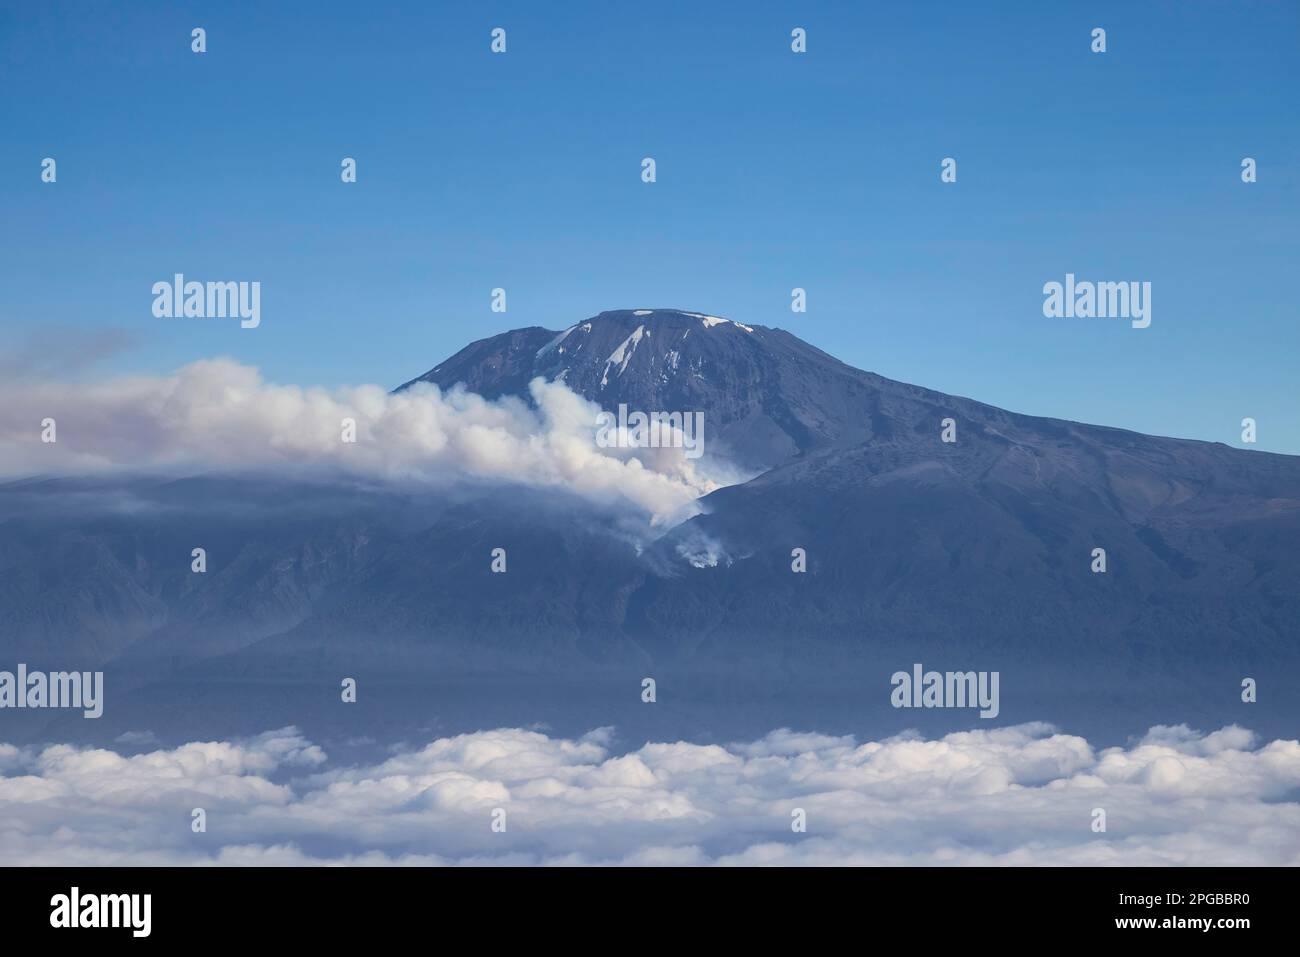 Aerial view, mountain peak of Kilimanjaro volcano with forest fire and smoke on the mountain flank, Tanzania, East Africa Stock Photo